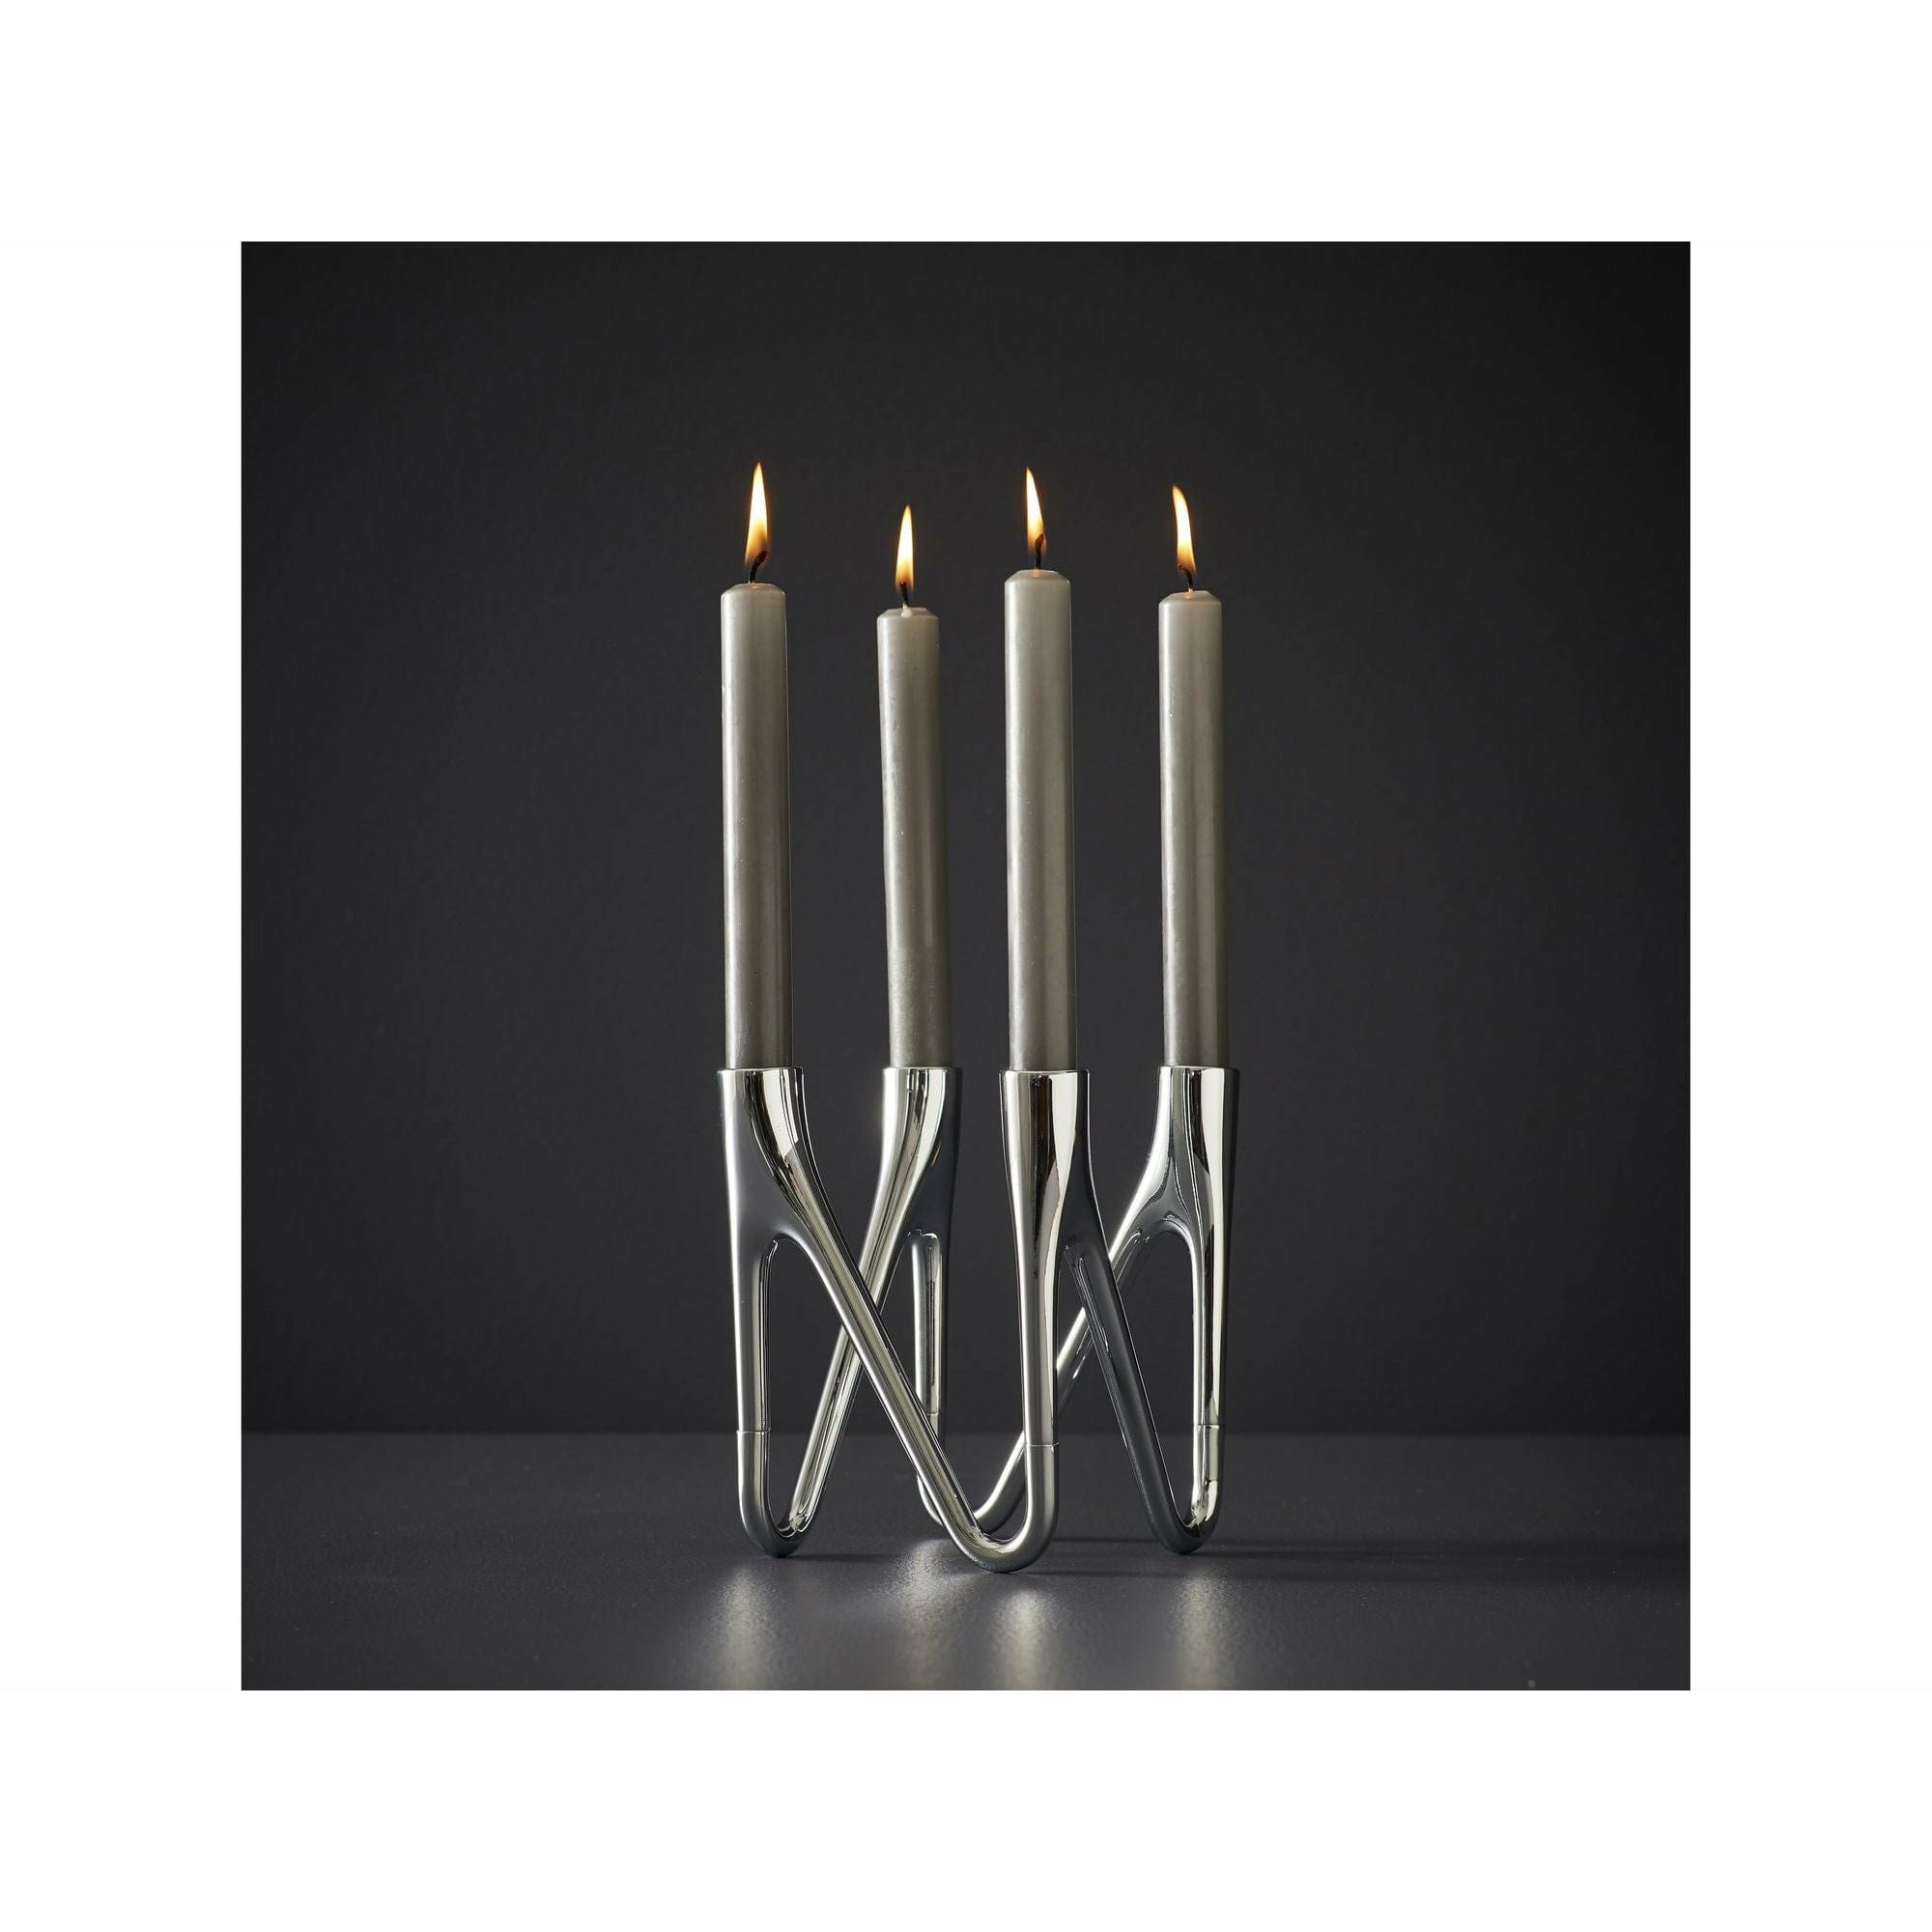 Morsø Roots Candle Suptor Chrome, 4 brazos